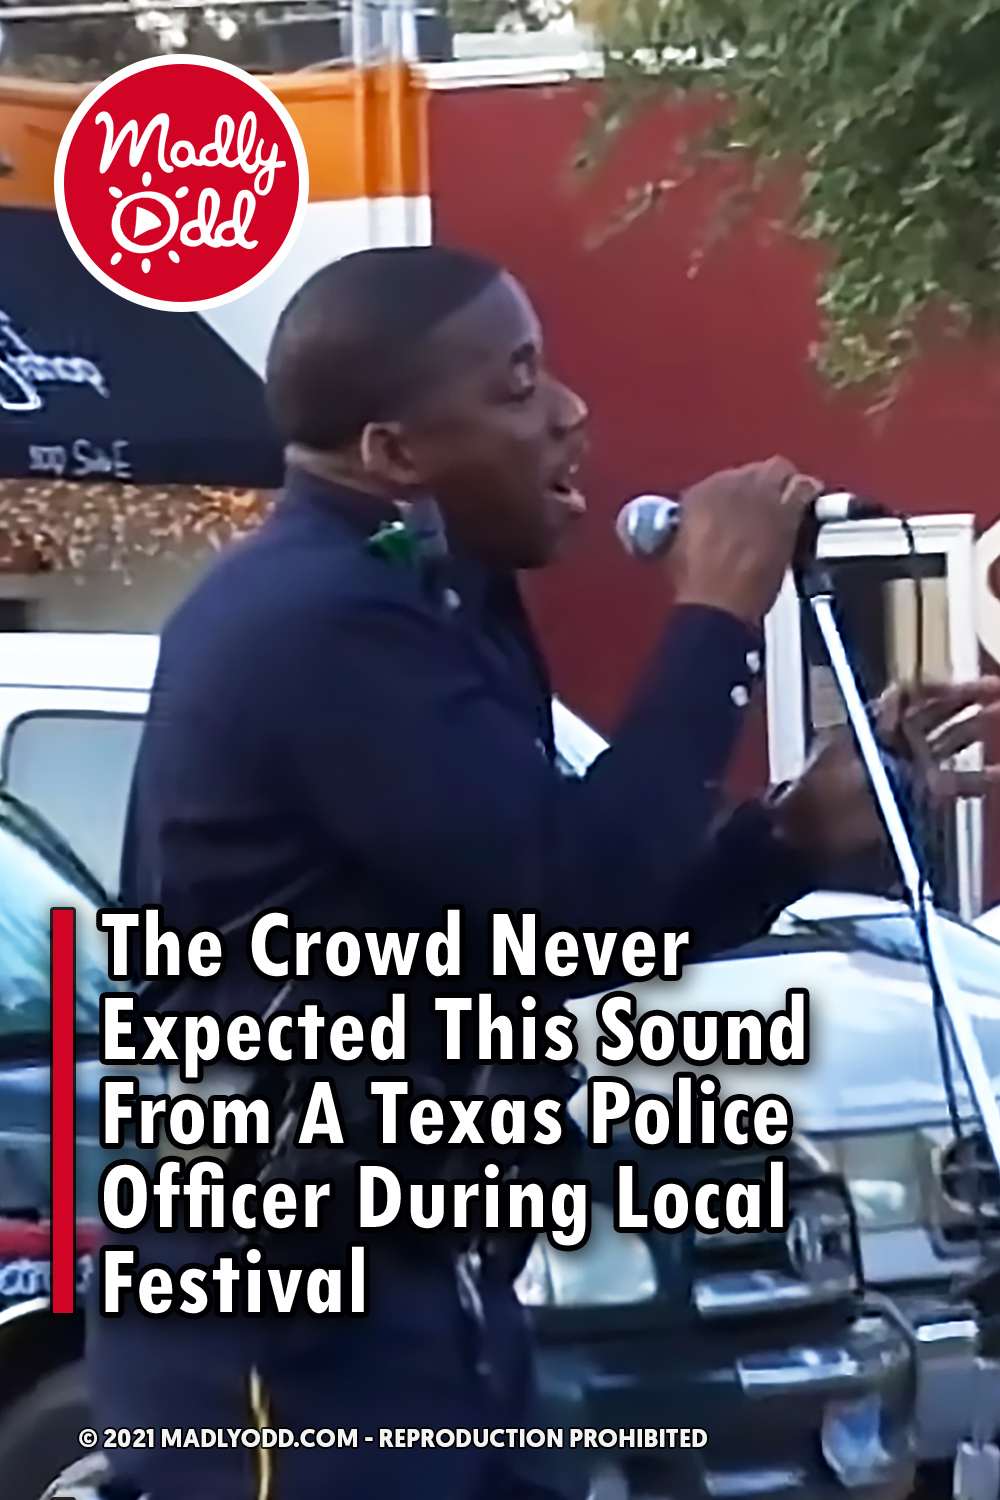 The Crowd Never Expected This Sound From A Texas Police Officer During Local Festival